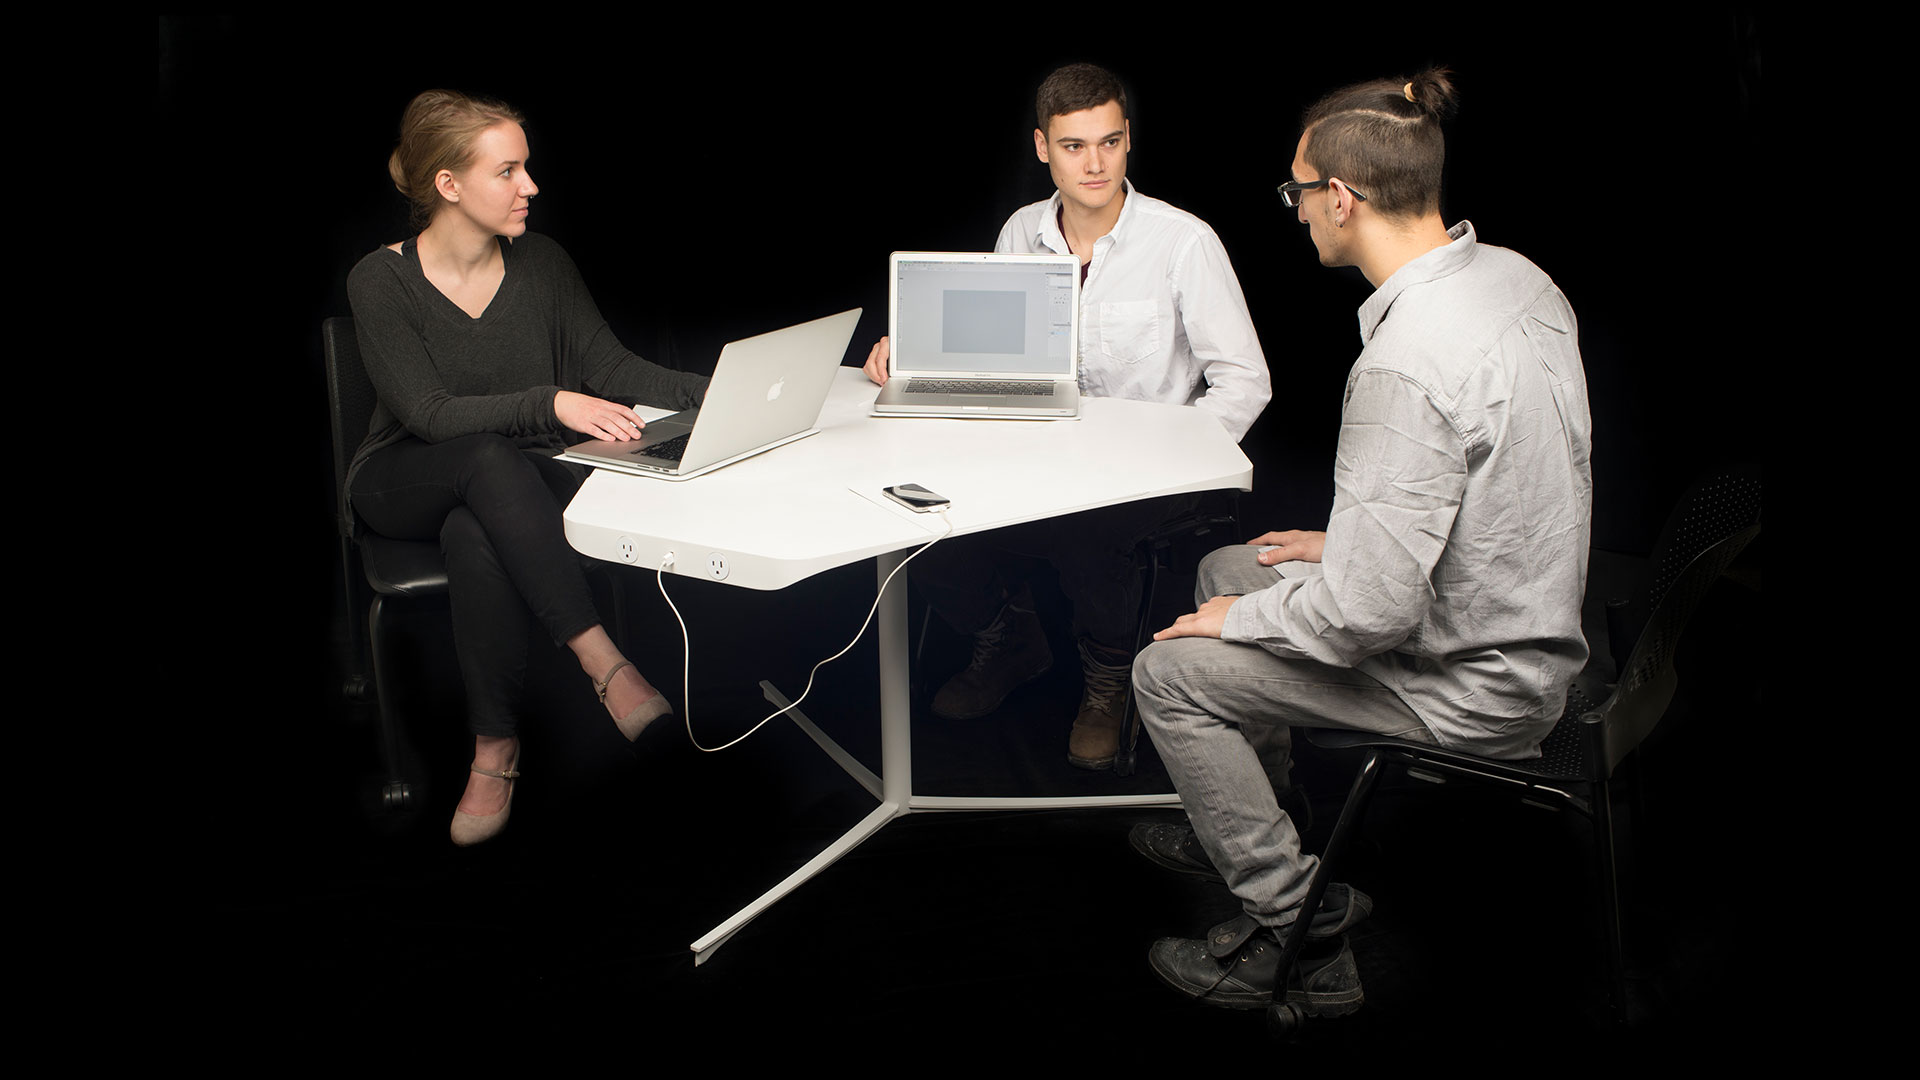 Three students around table, triangularly geometric white table with one flat side, two students on other sides with laptops plugged into outlets attached to table